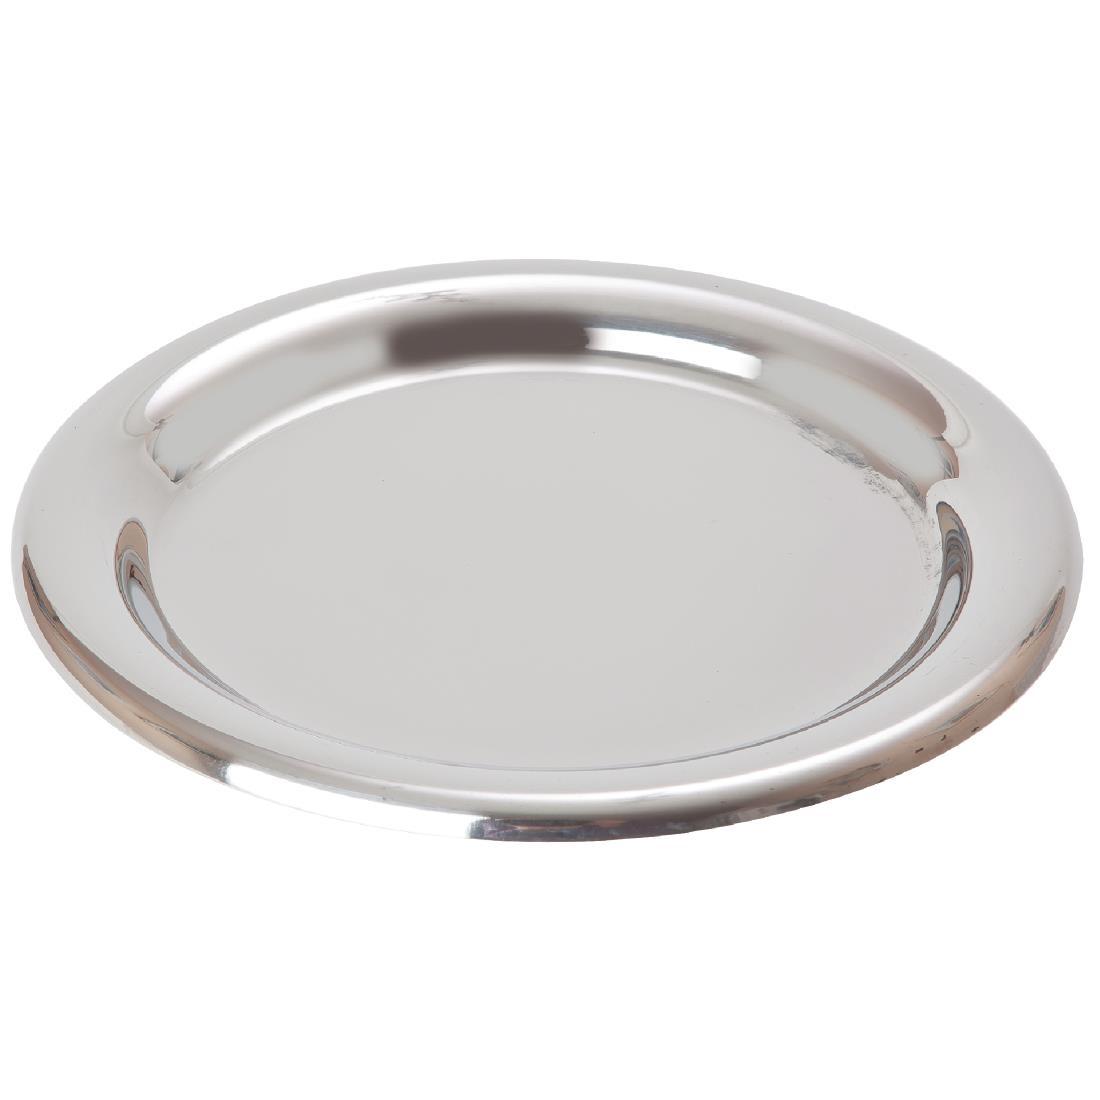 Beaumont Stainless Steel Tip Tray - CJ988  - 1